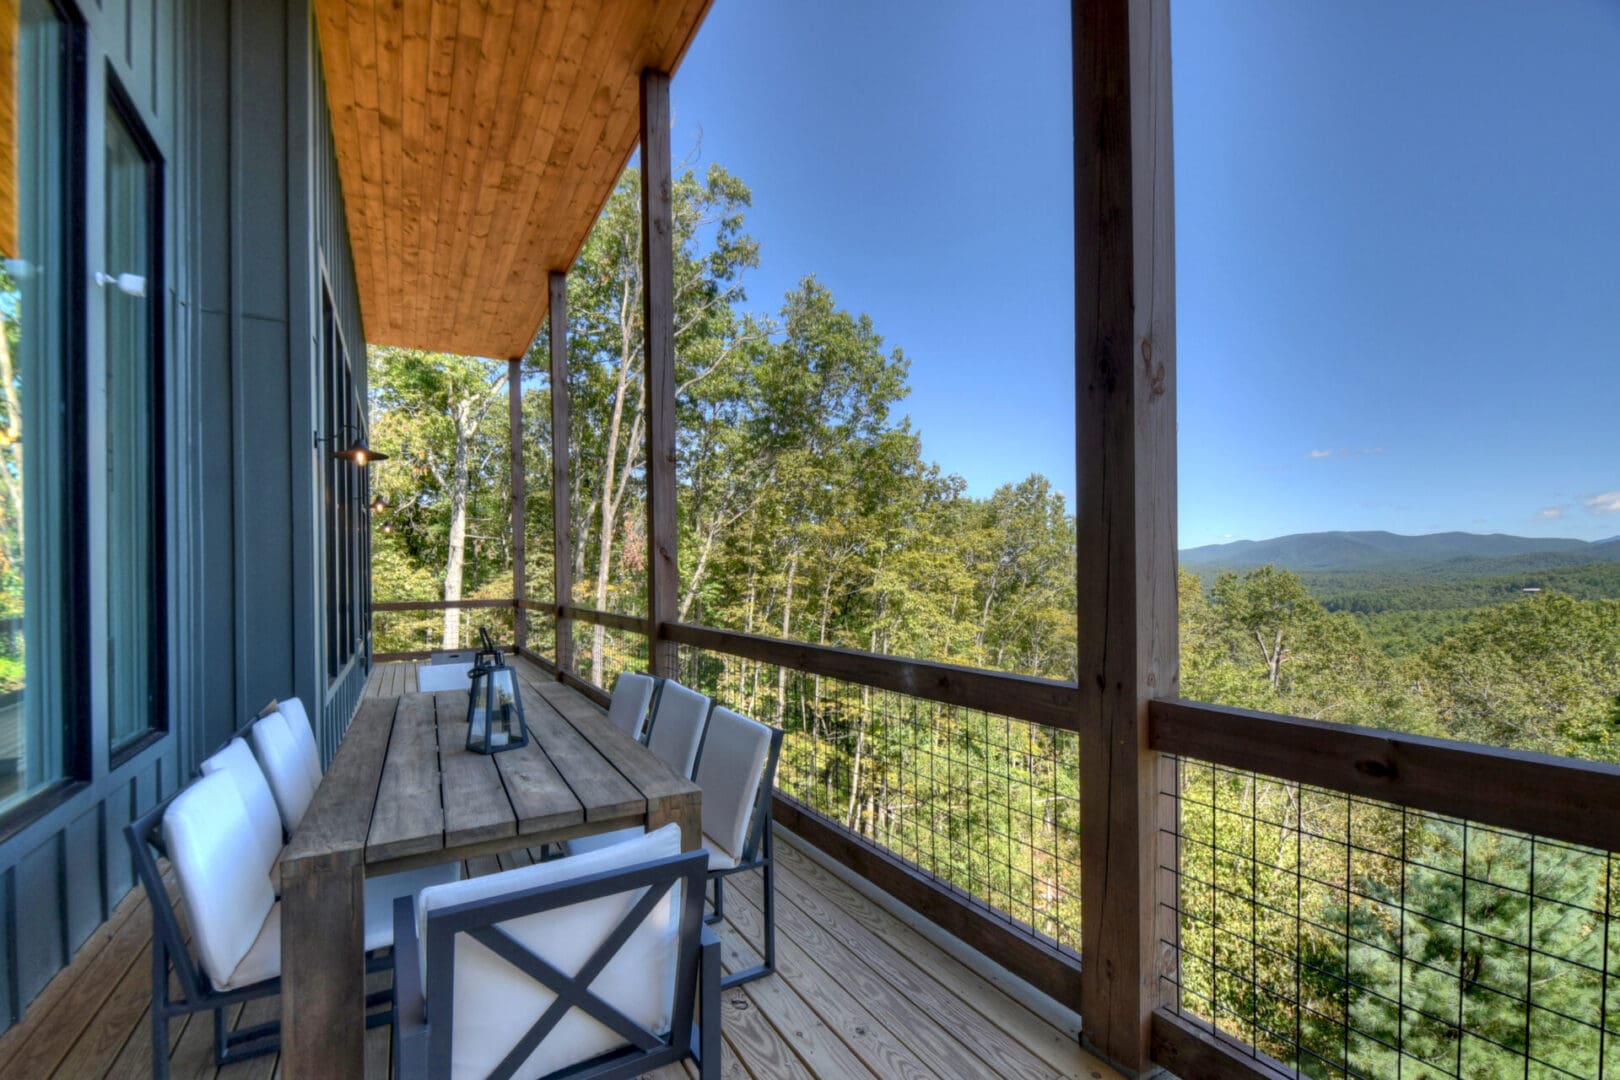 Architectural Design services for a deck with a table and chairs overlooking the mountains.